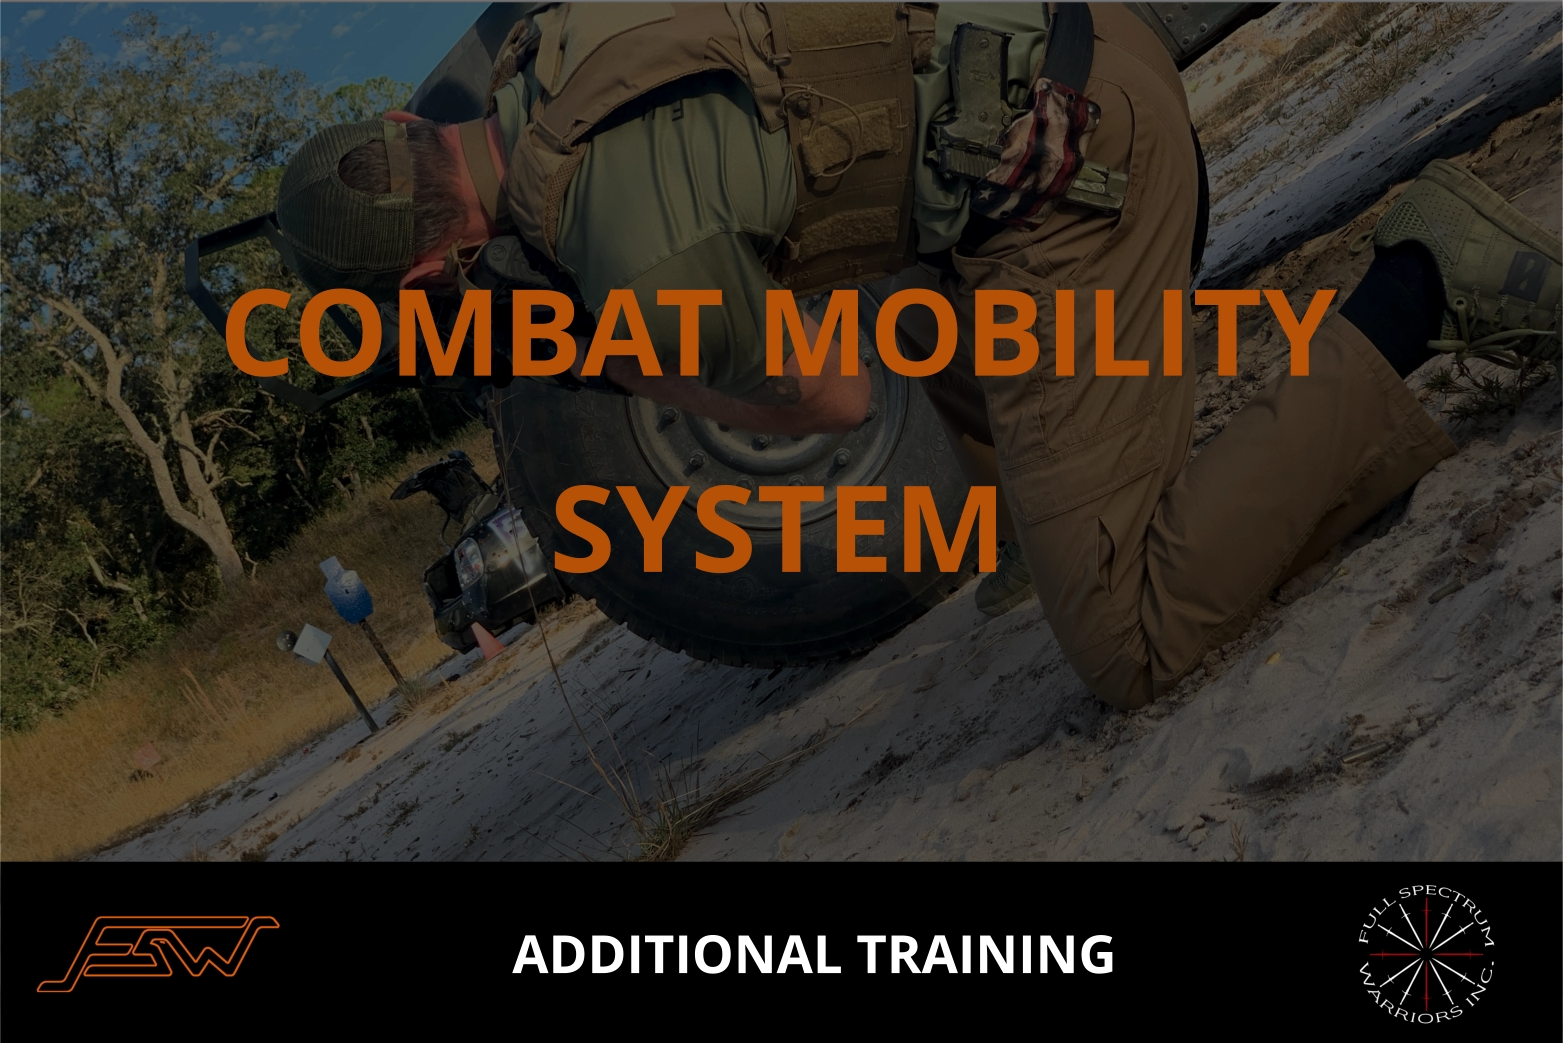 COMBAT MOBILITY SYSTEM